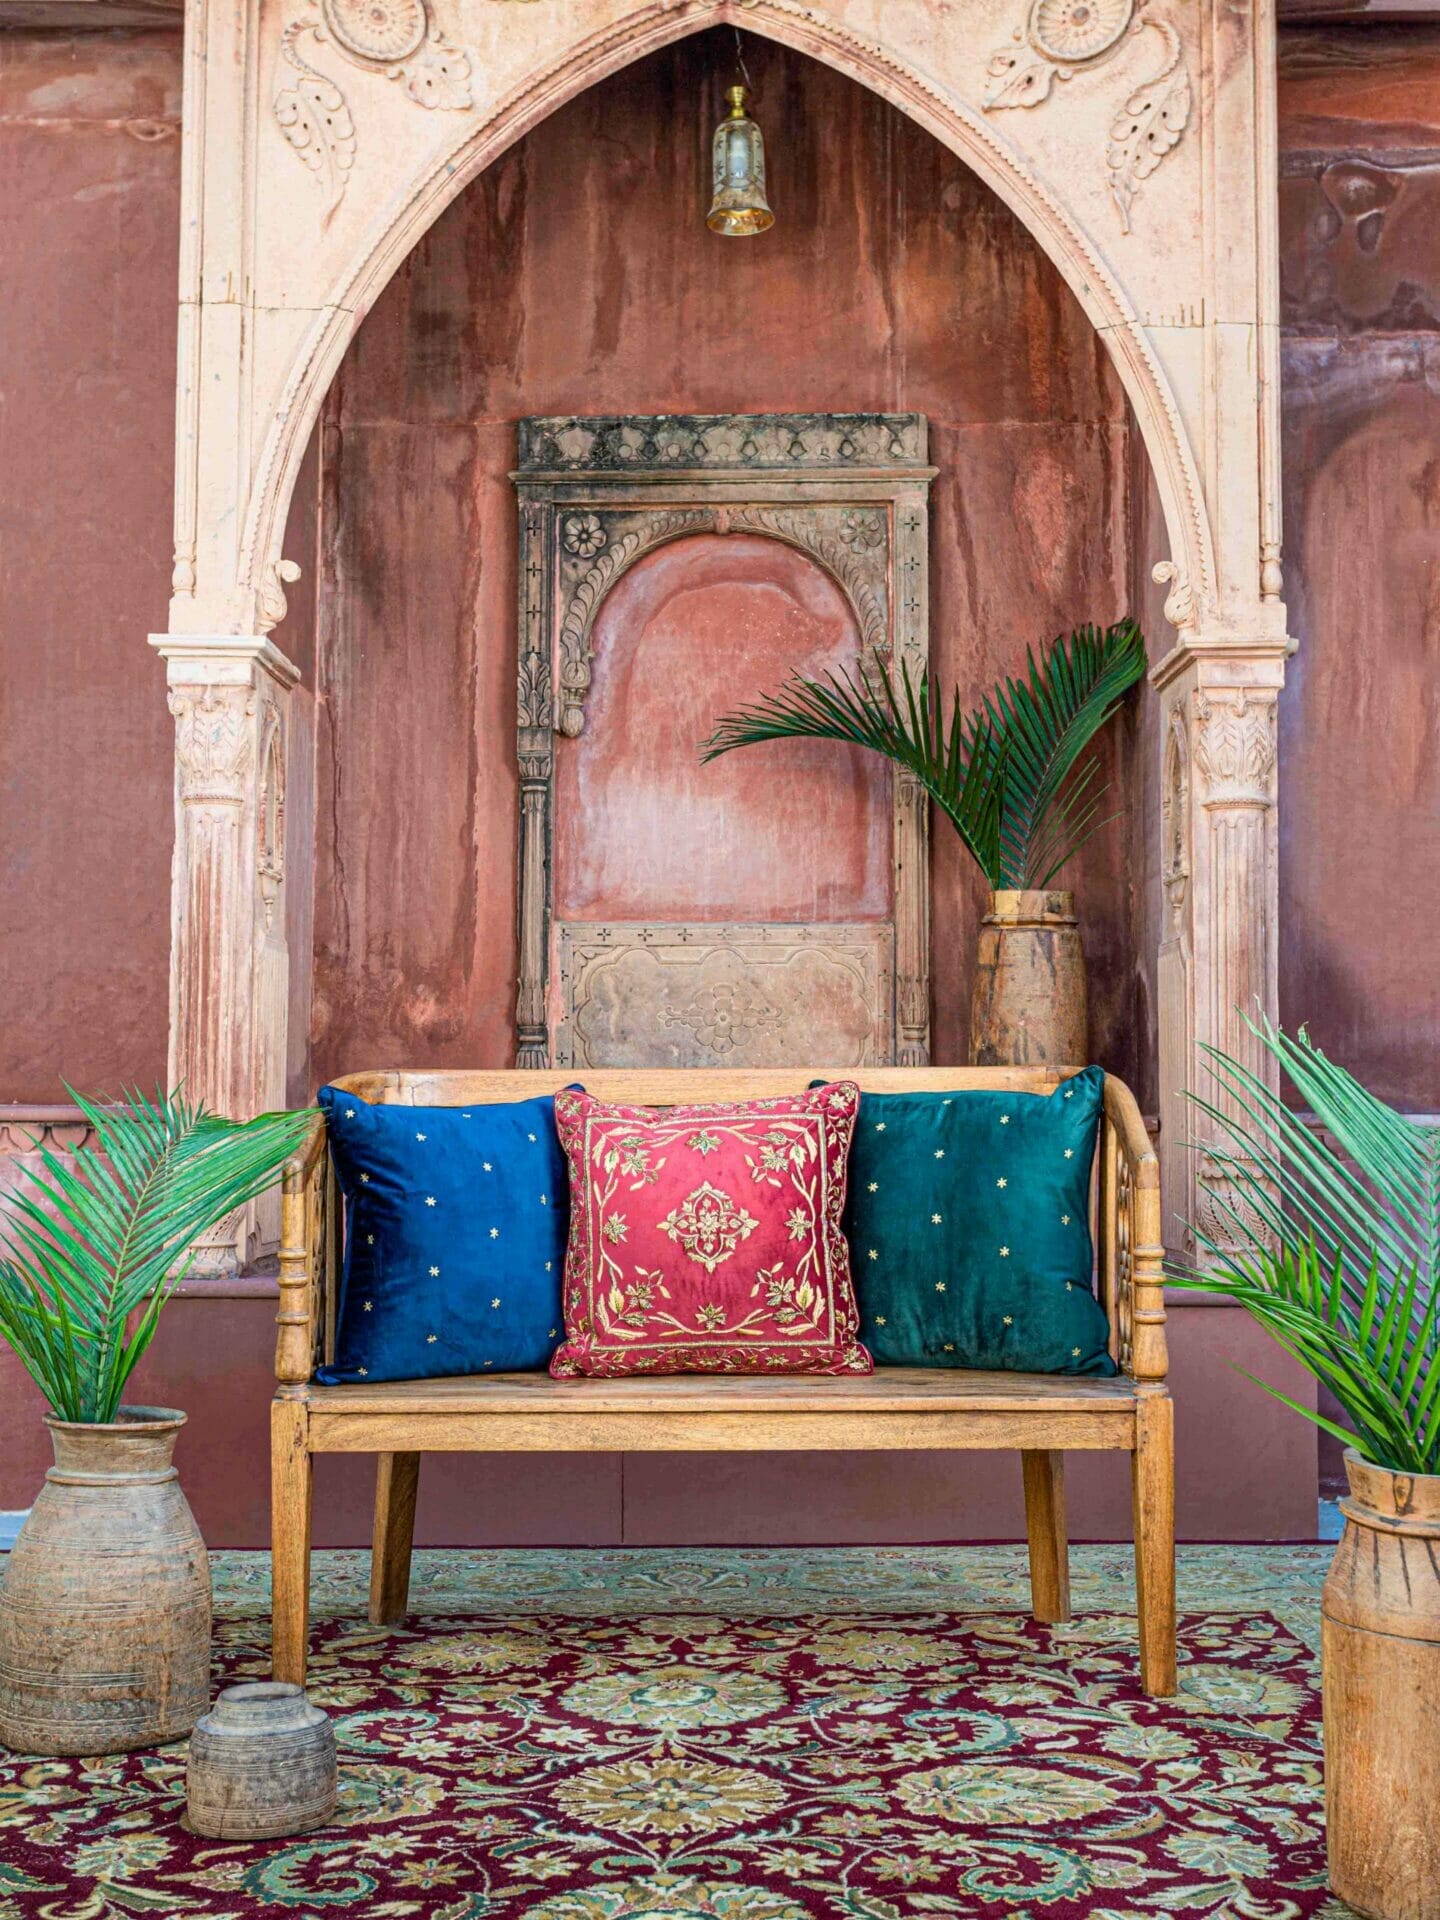 Master Indian craftsmanship and design with MiRooh